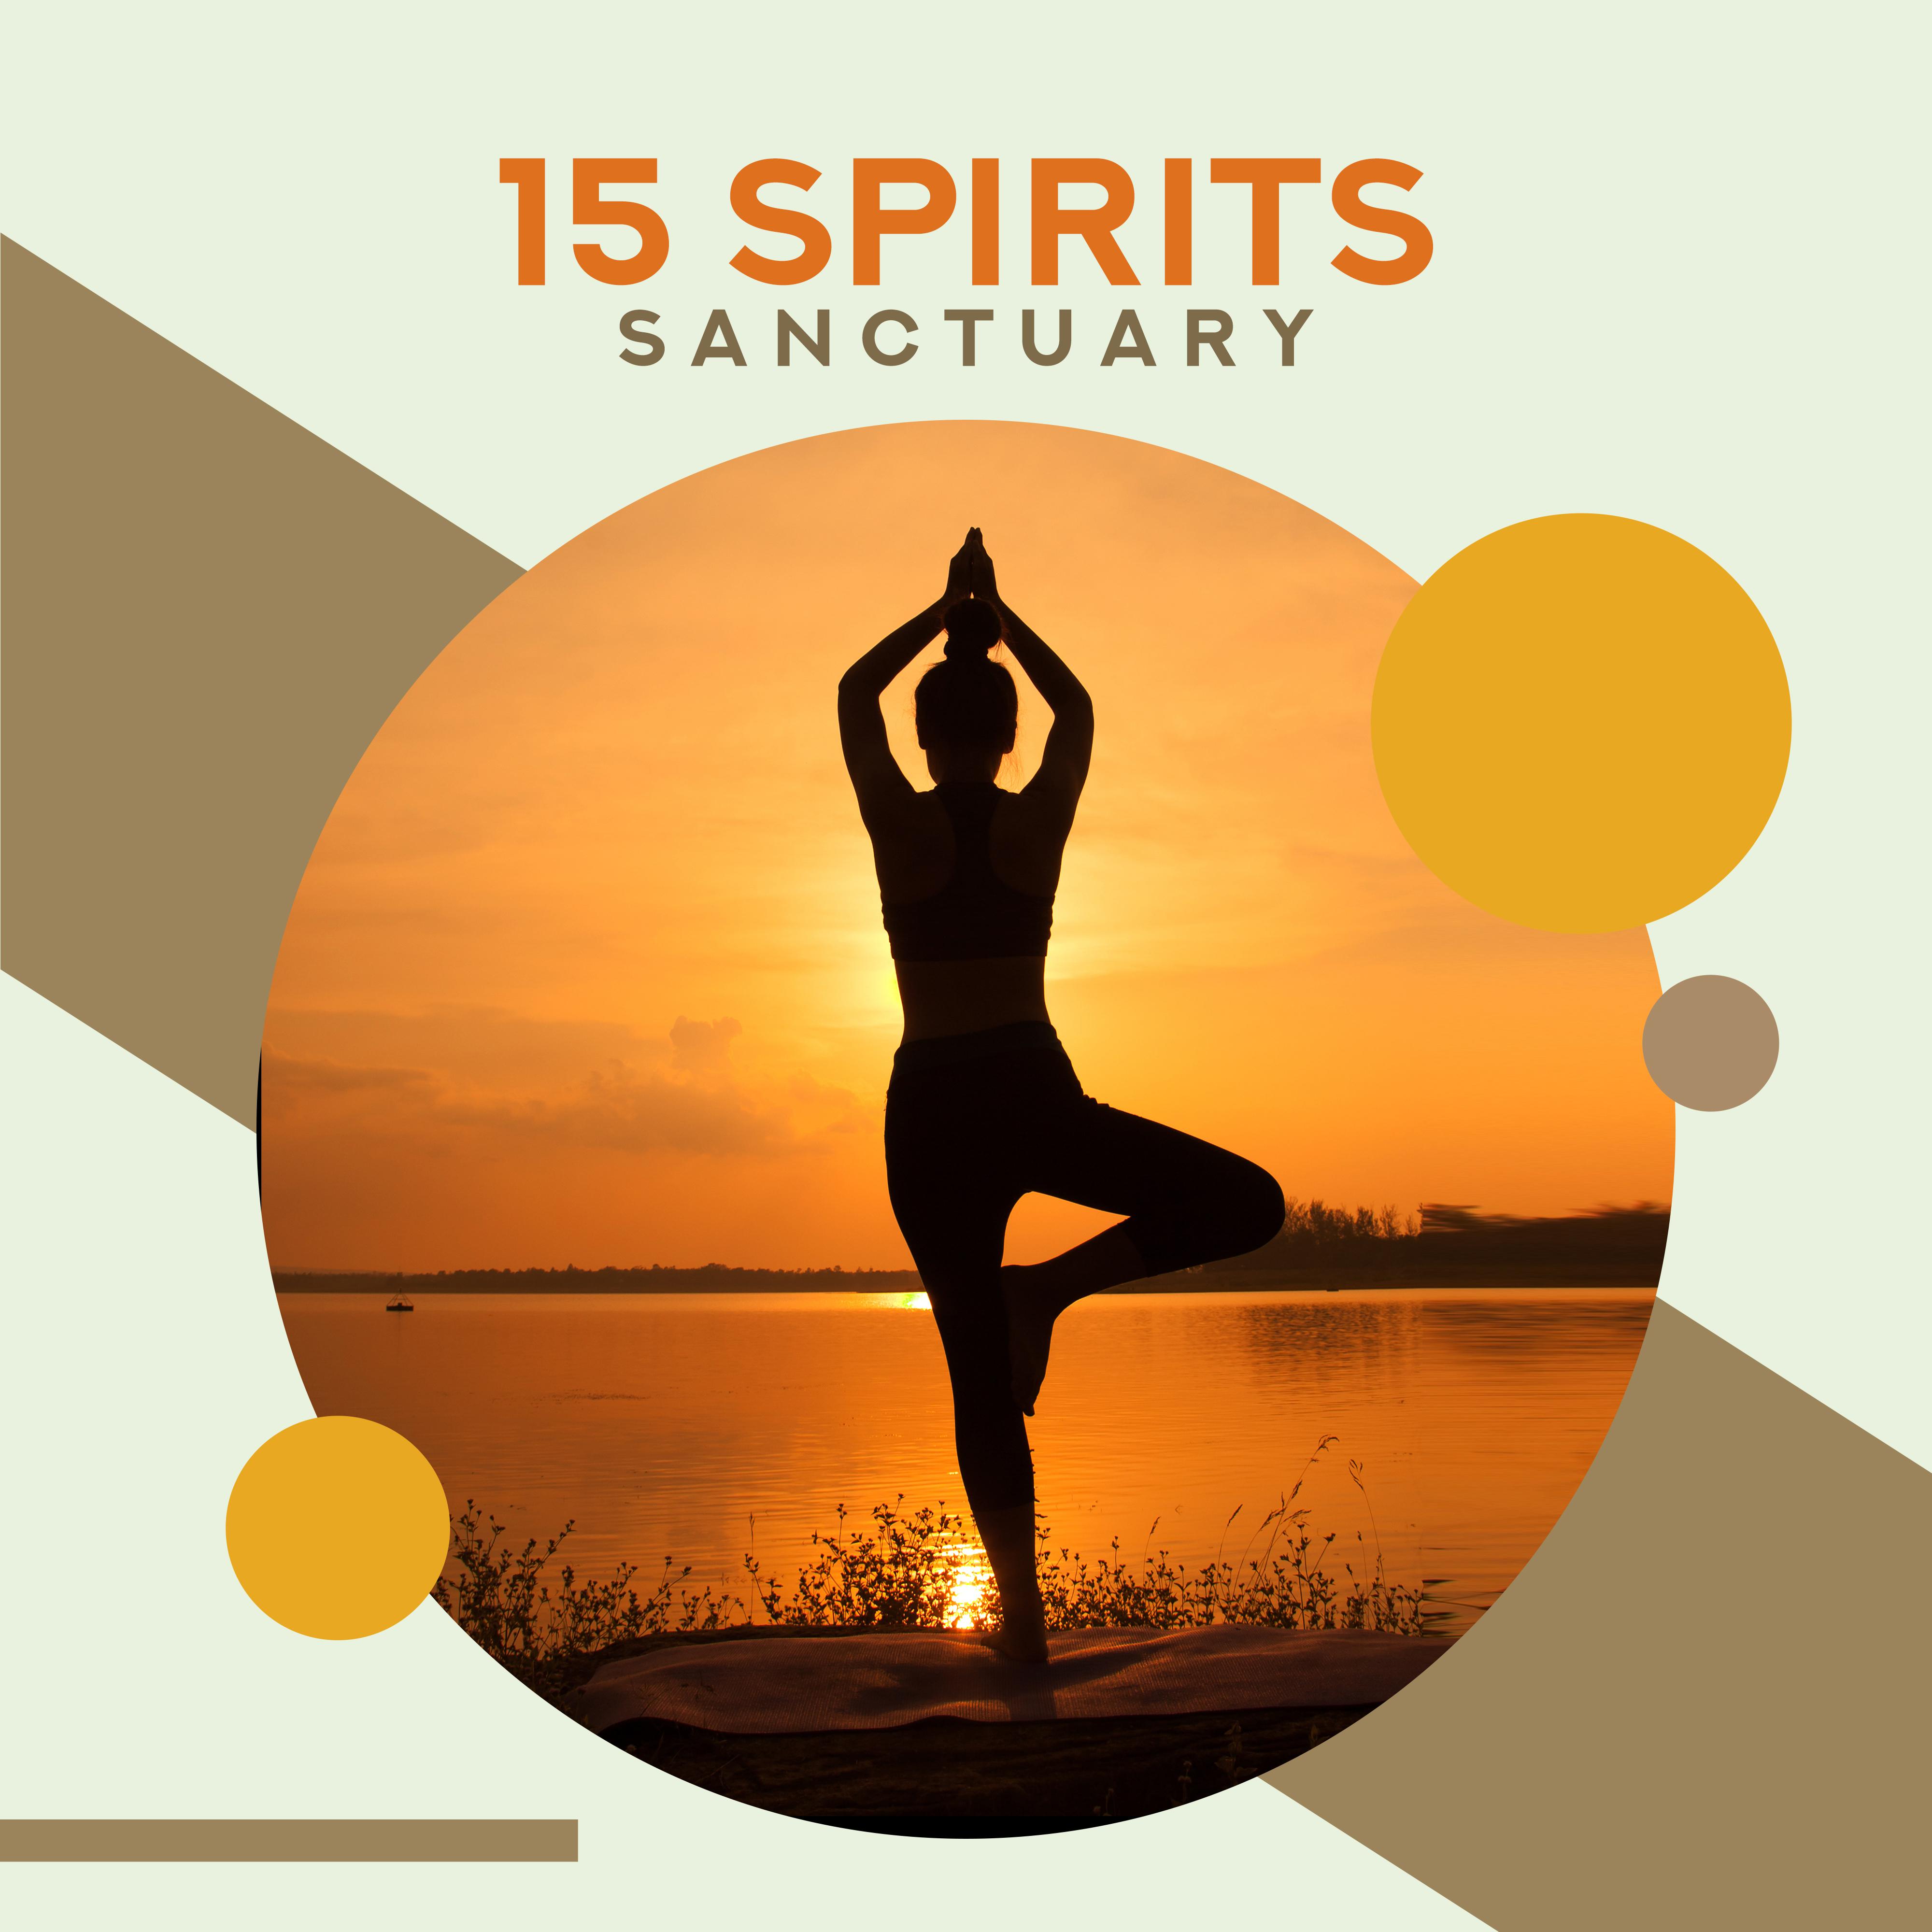 15 Spirits Sanctuary  Healing Meditation Music for Sleep, Relaxation, Yoga, Inner Silence, New Age Music, Relax Zone, Full Concentration, Zen Serenity